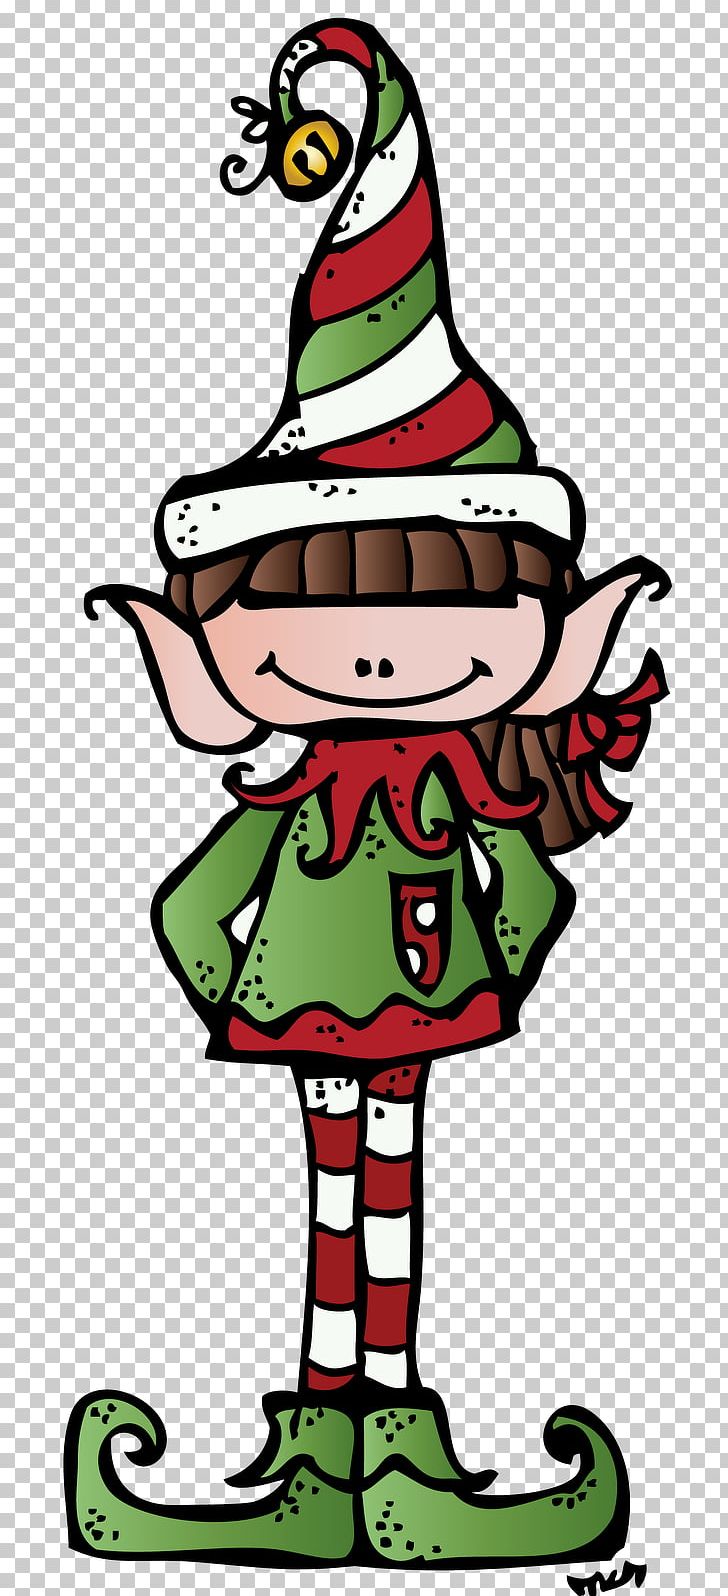 Rudolph The Elf On The Shelf Christmas PNG, Clipart, Art, Artwork, Christmas Decoration, Christmas Elf, Christmas Ornament Free PNG Download